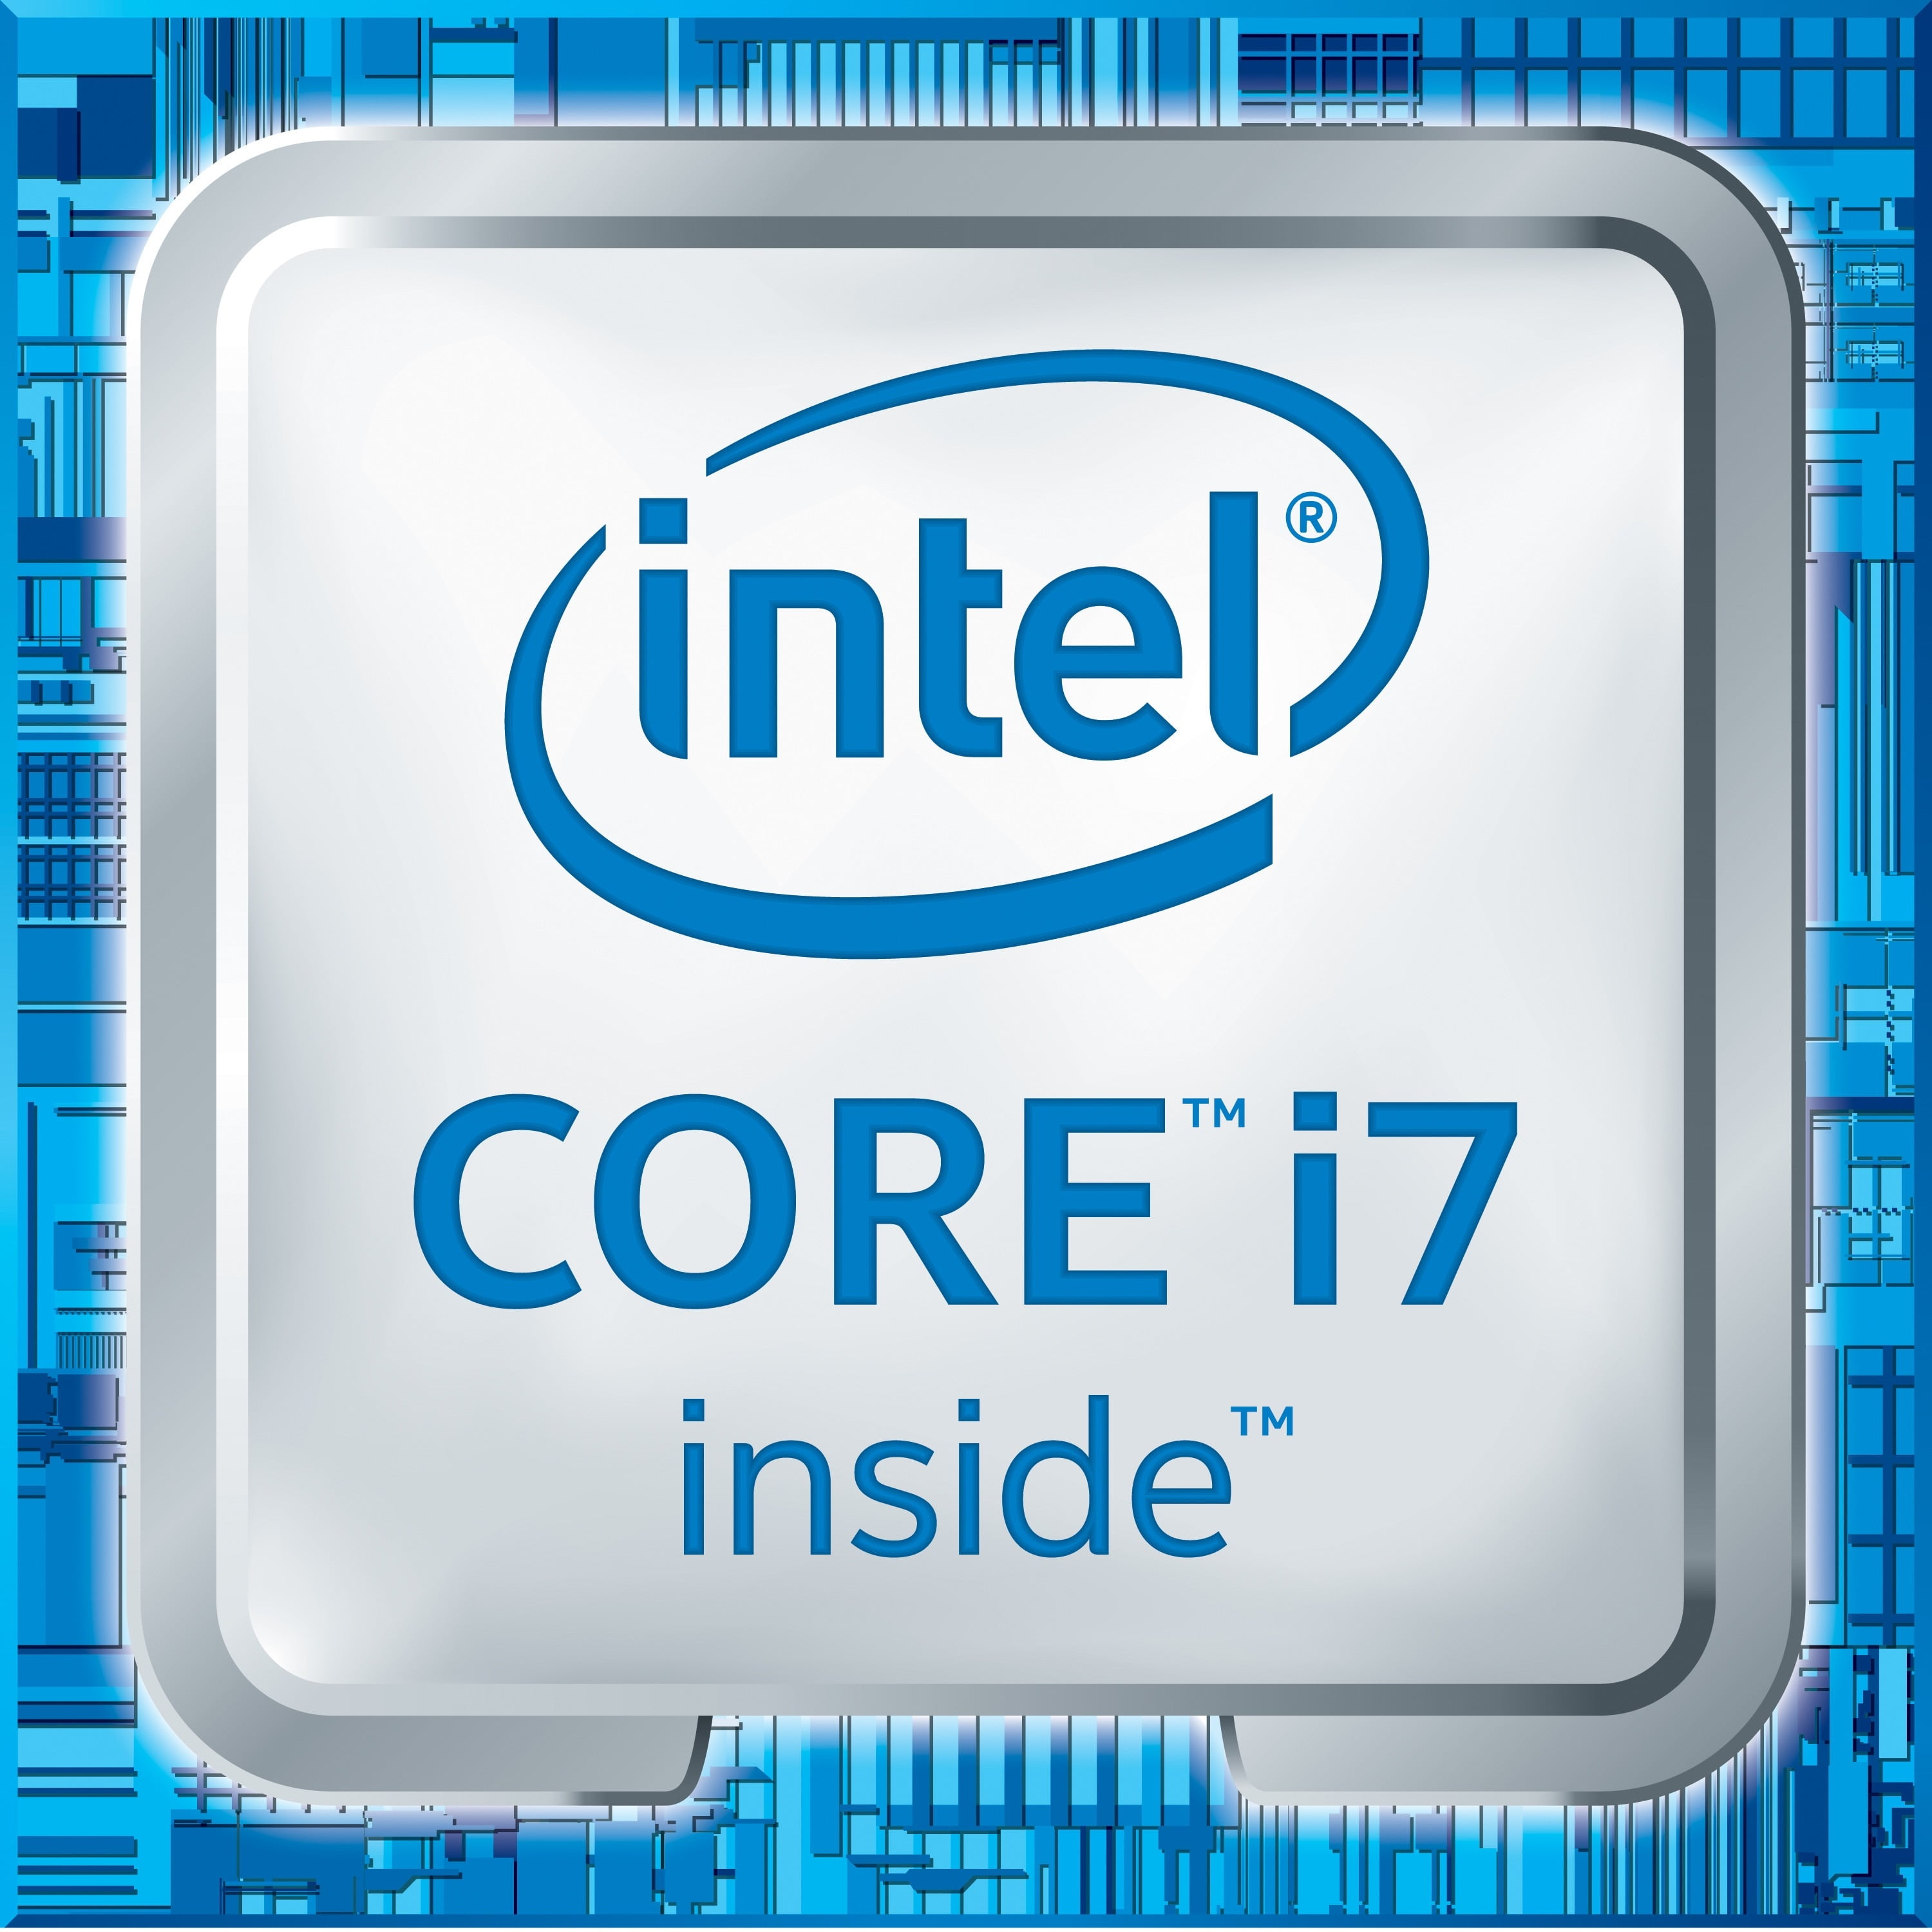 Intel Core i7 6700 - 3.4 GHz - 4 cores - 8 threads - 8 MB cache